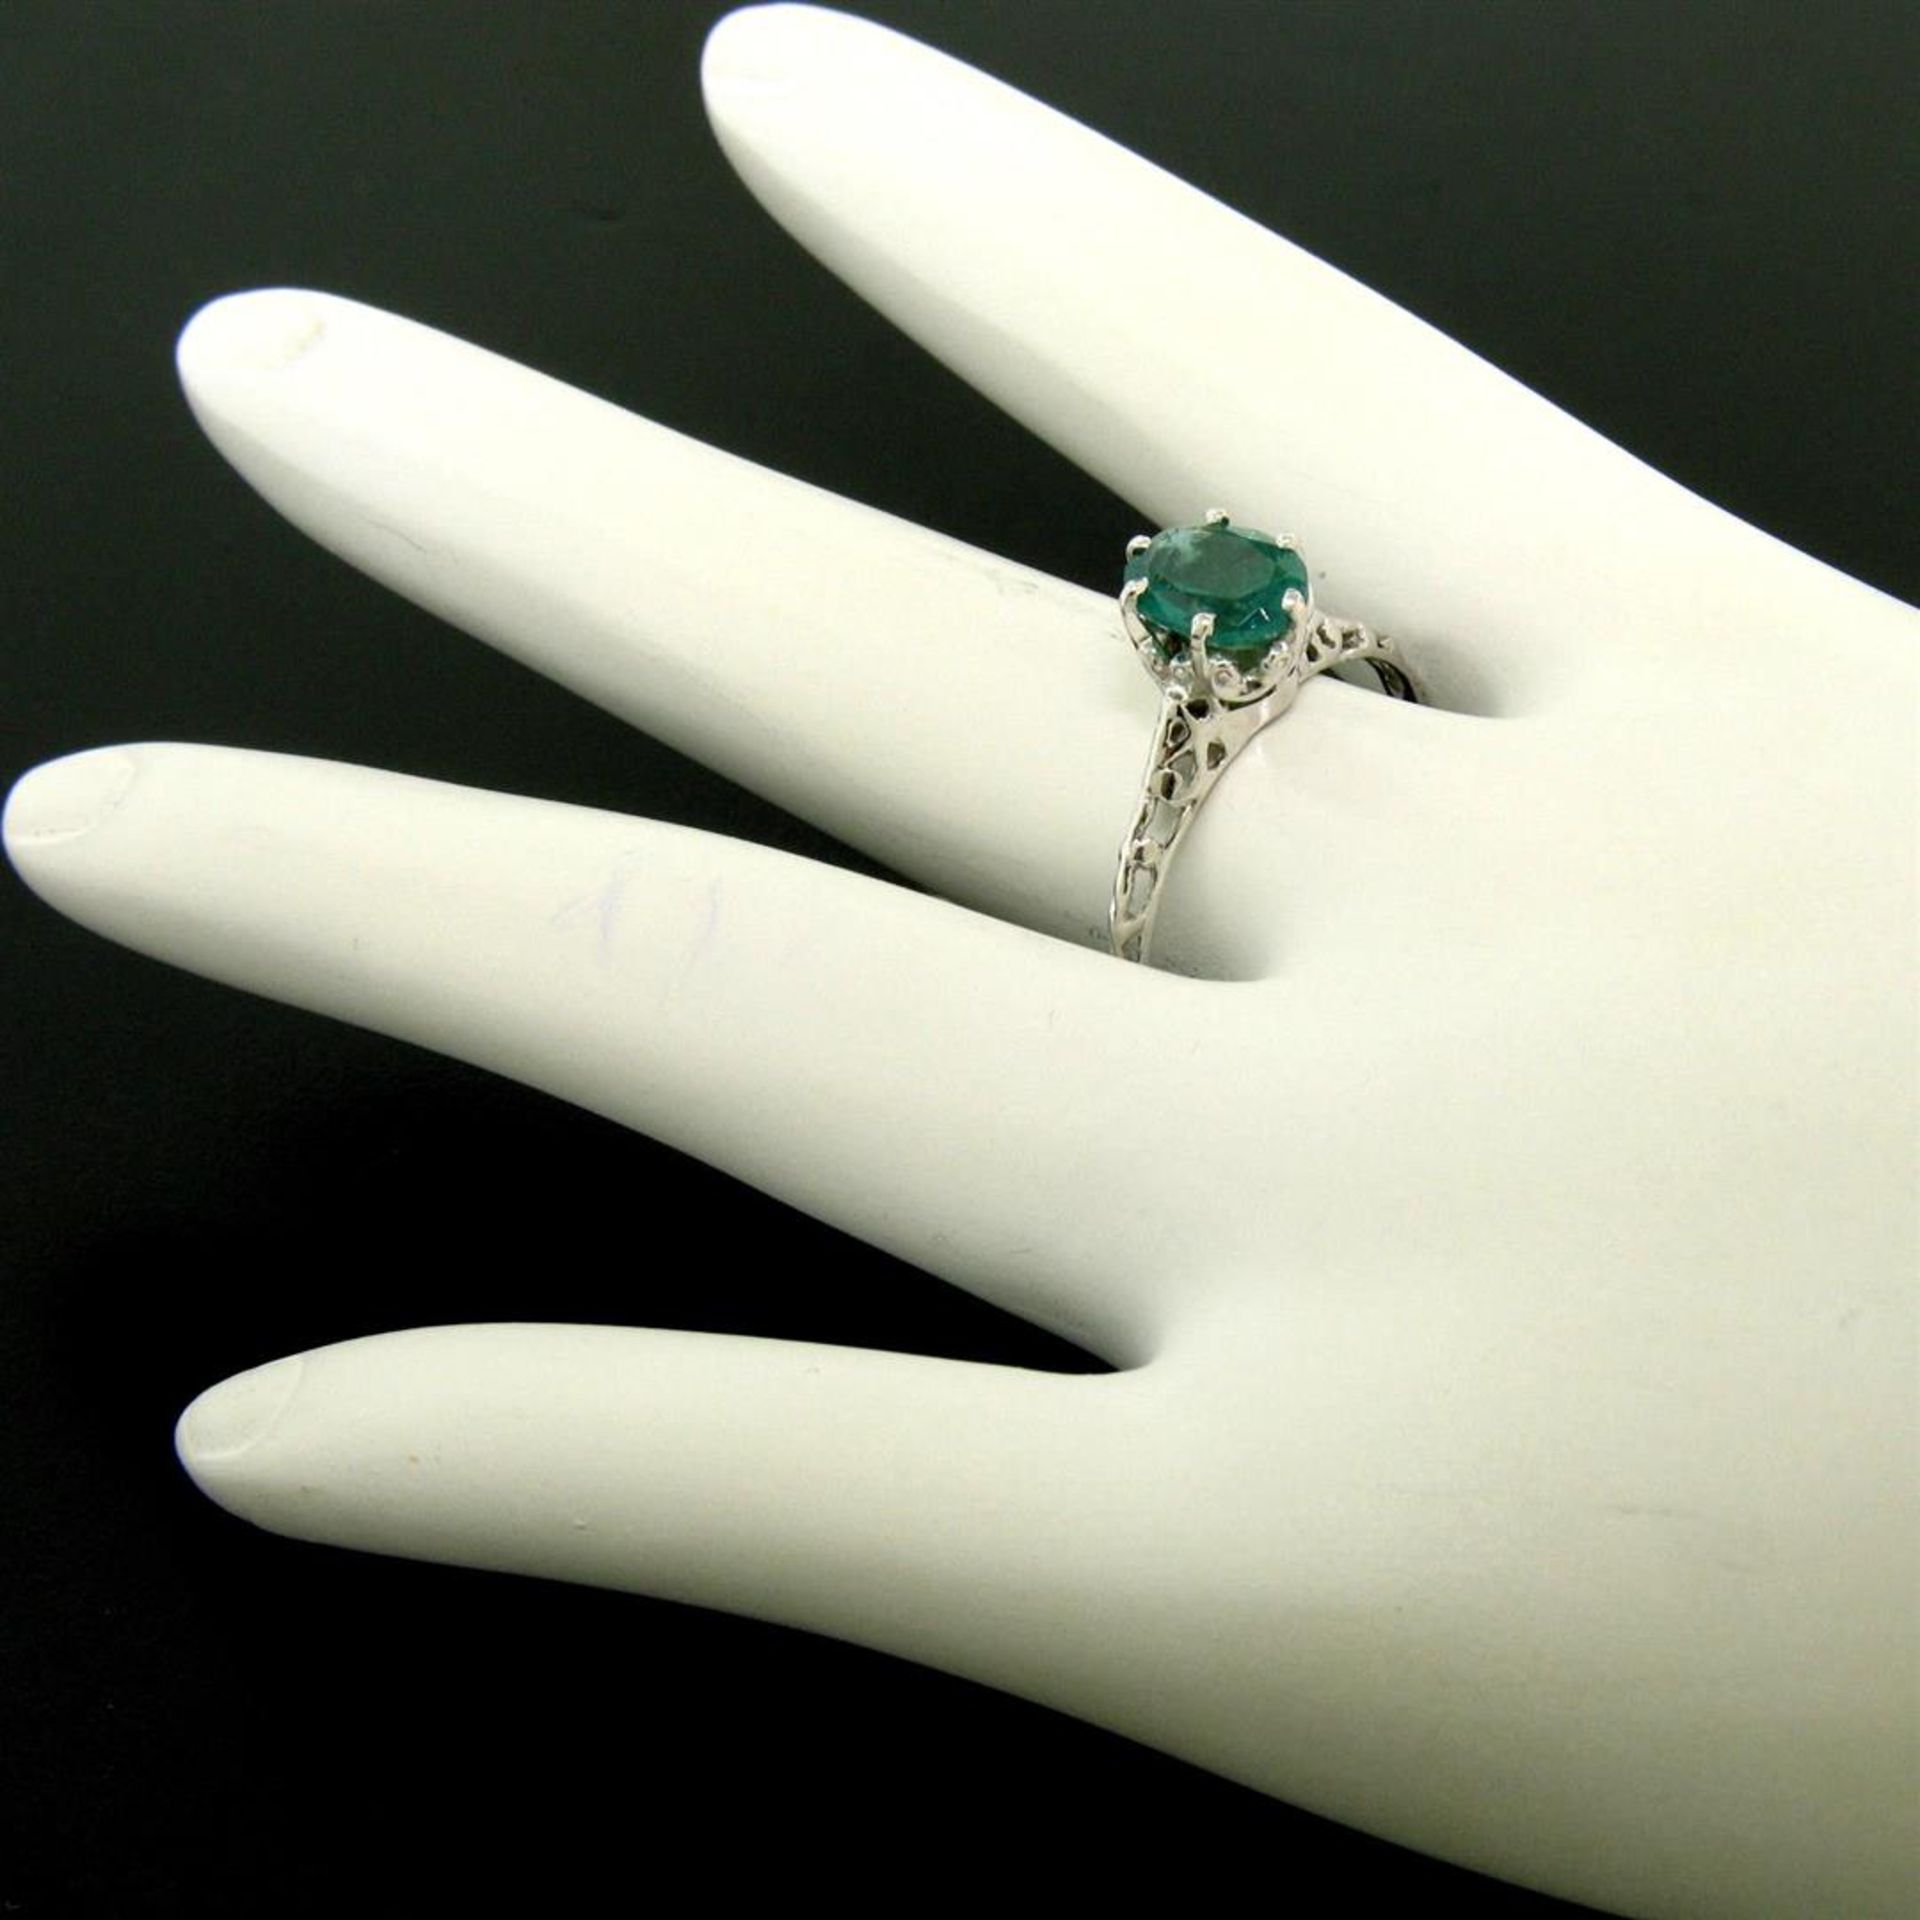 14k White Gold 1.38 ct Prong Set Oval Cut Emerald Filigree Solitaire Ring - Image 3 of 8